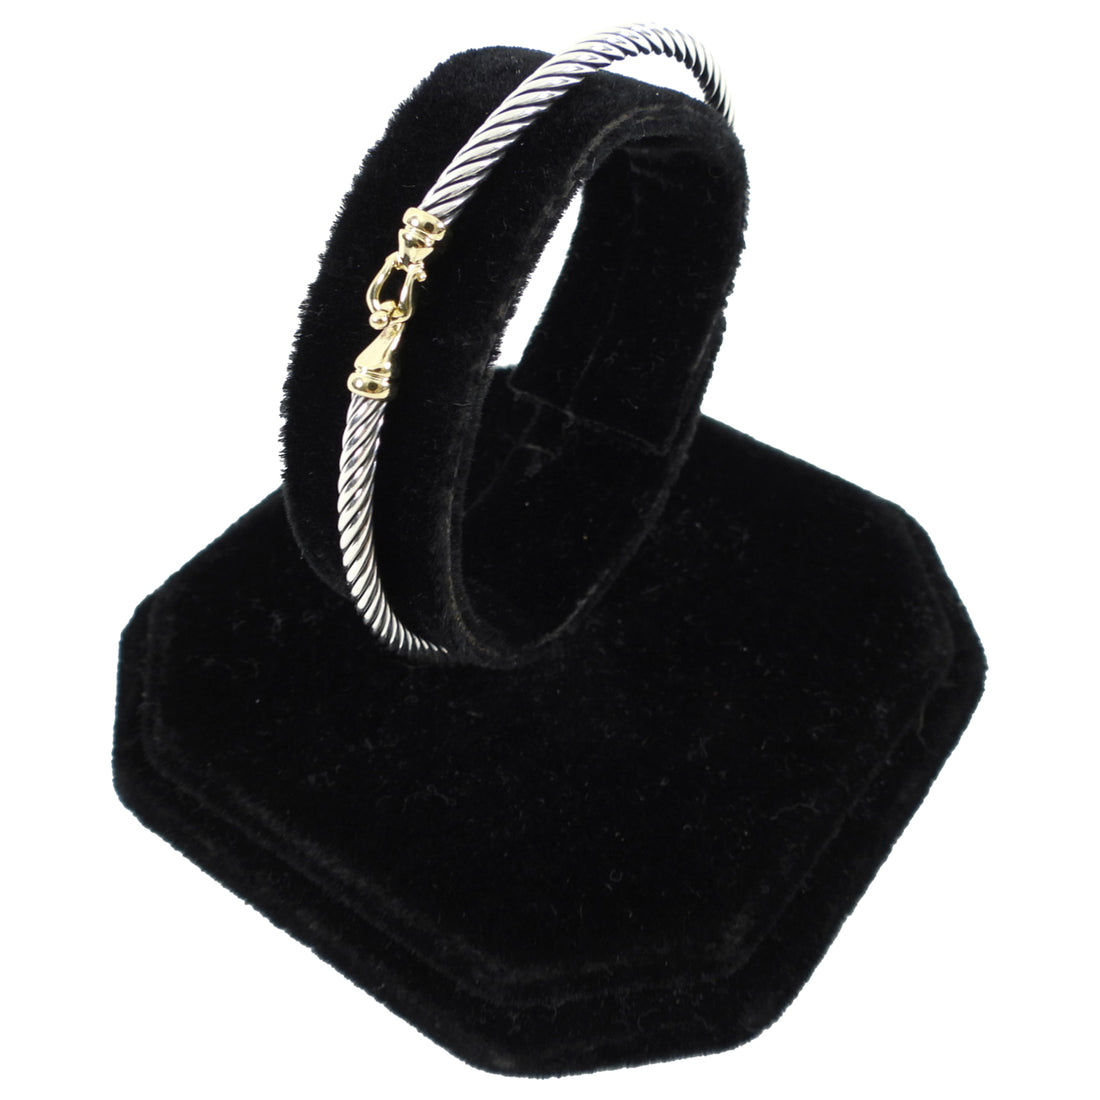 David Yurman Sterling and Gold 3mm Buckle Cable Classic Bracelet